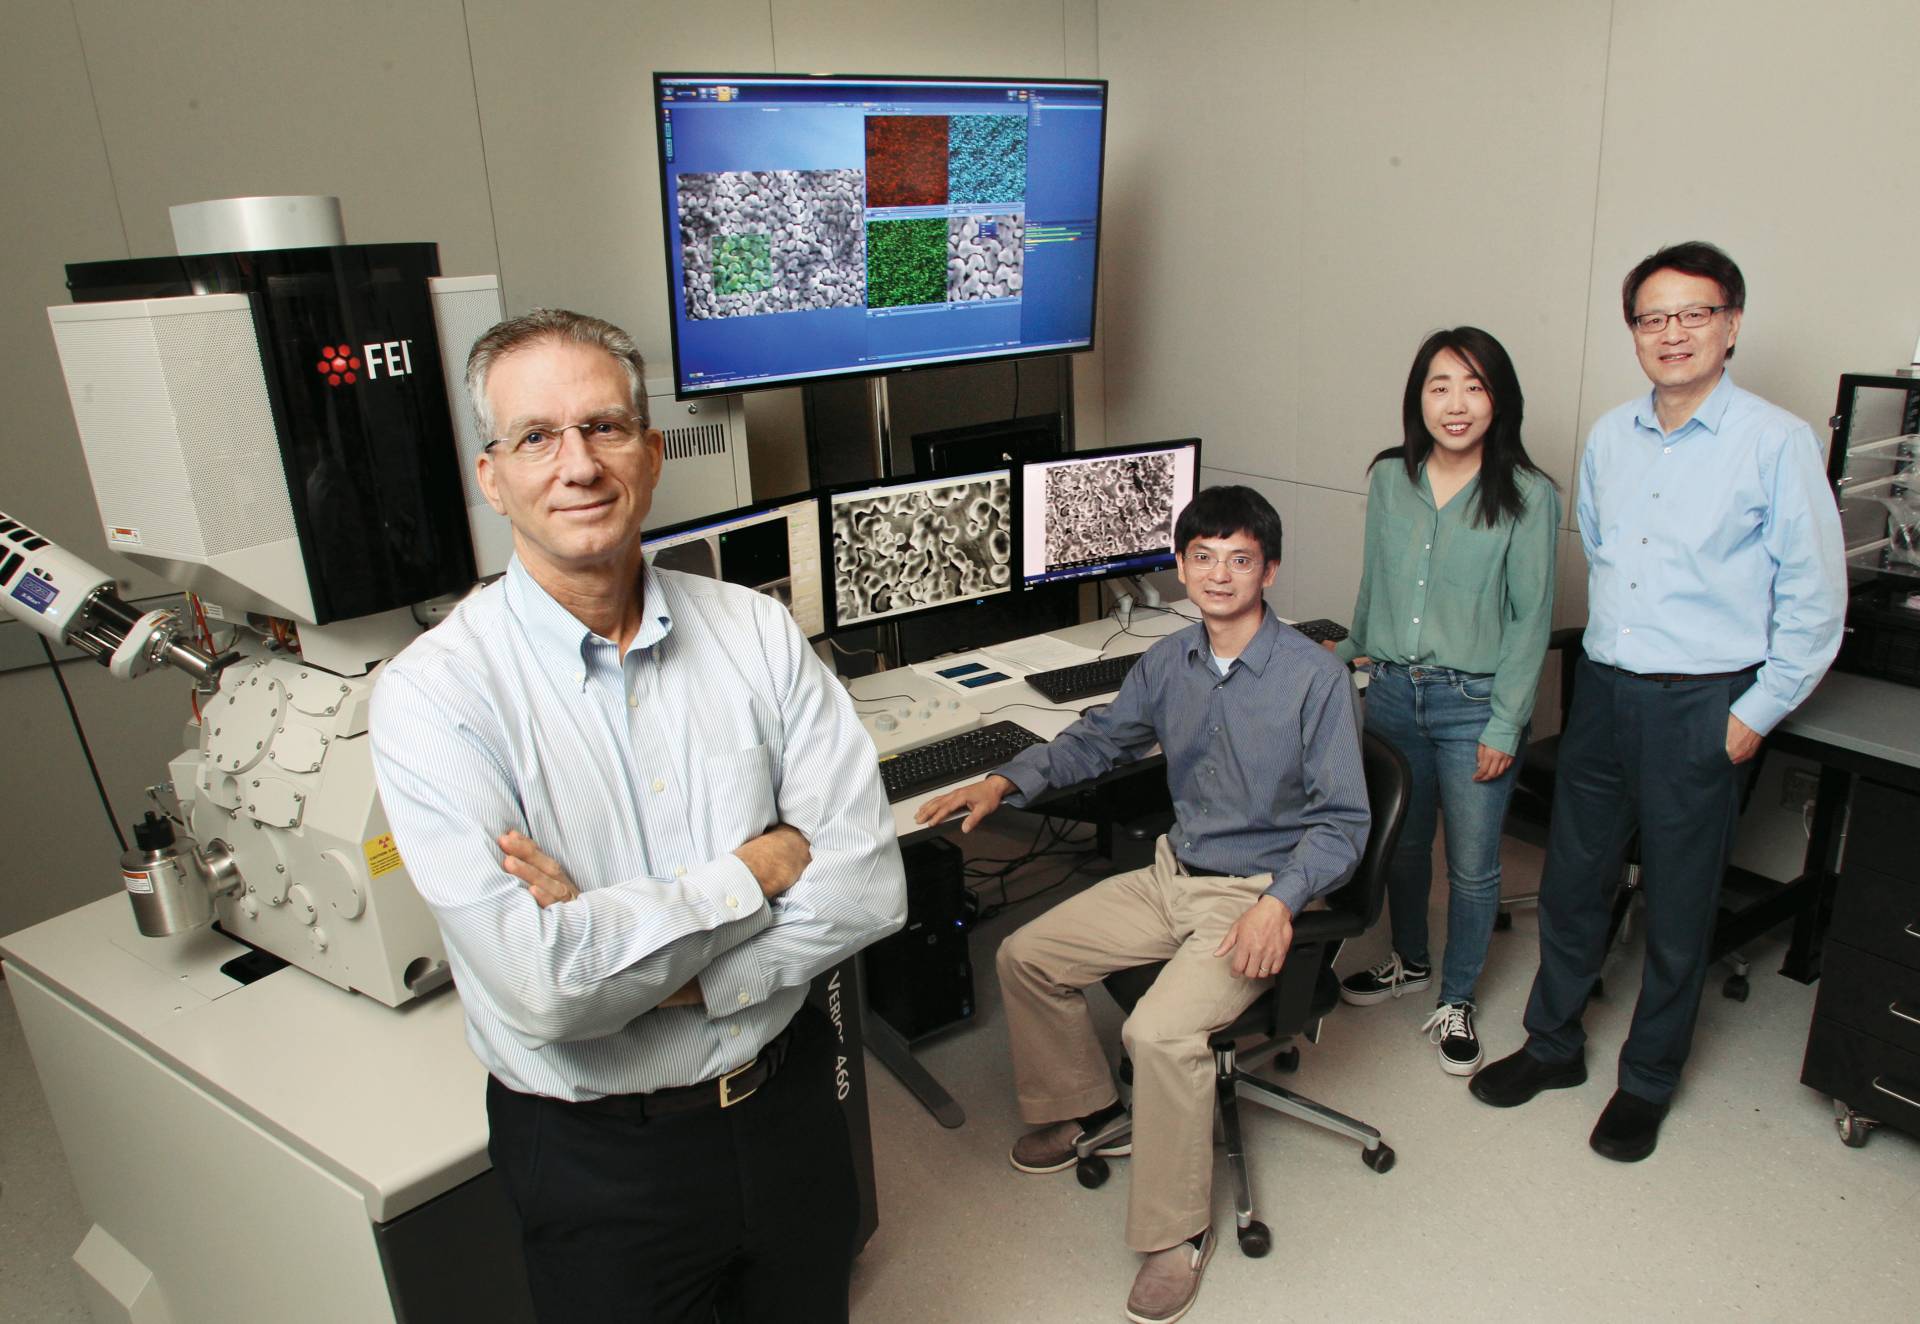 Researchers sit and stand infront of a large display